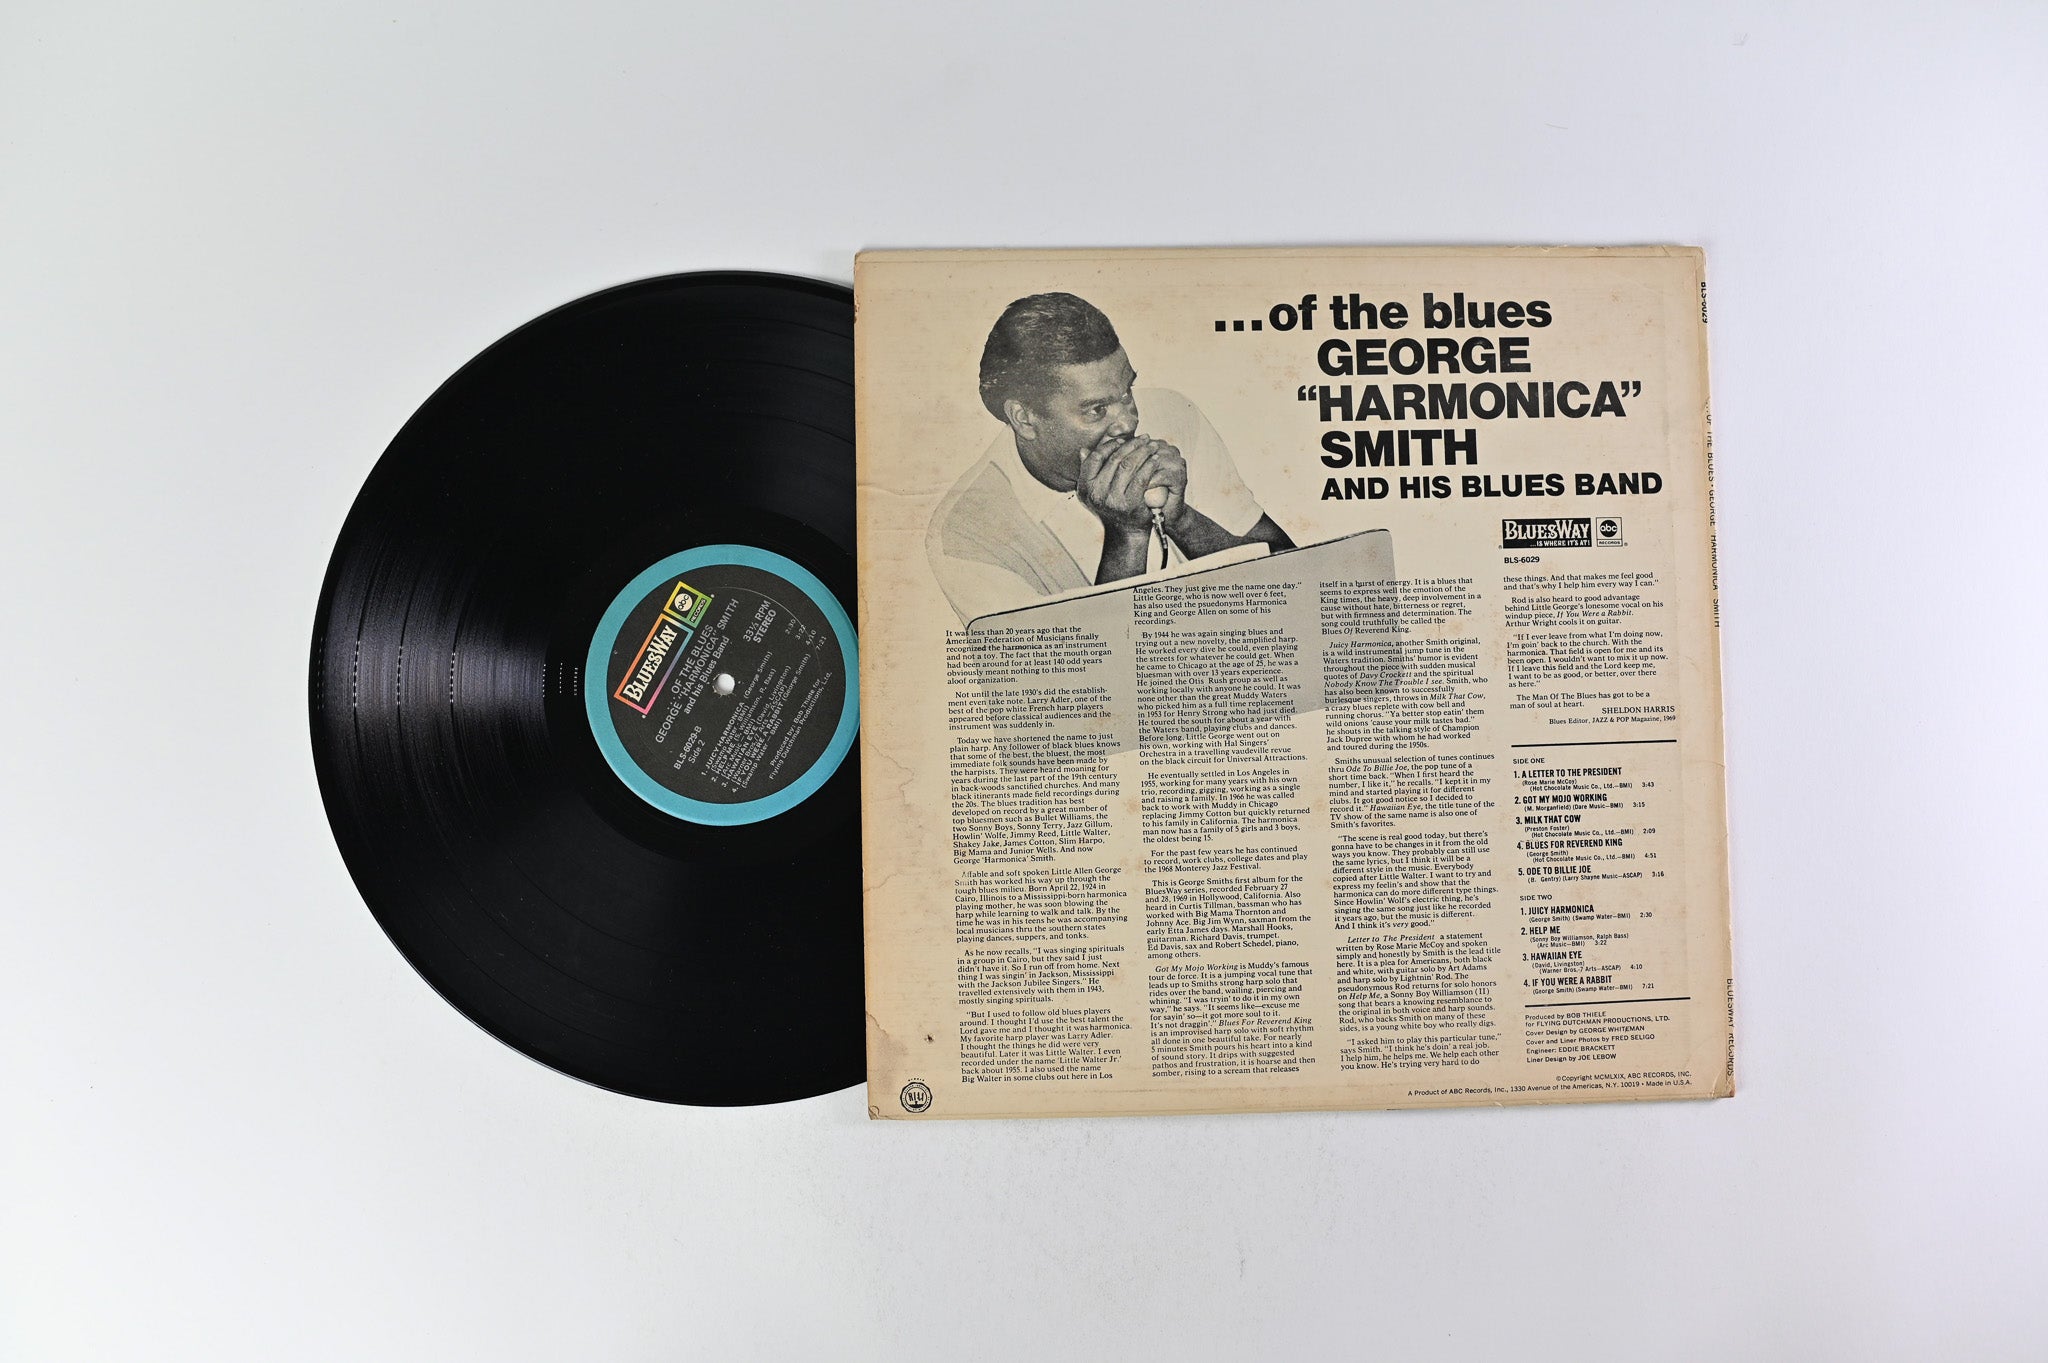 George "Harmonica" Smith And His Blues Band – ...Of The Blues on Bluesway